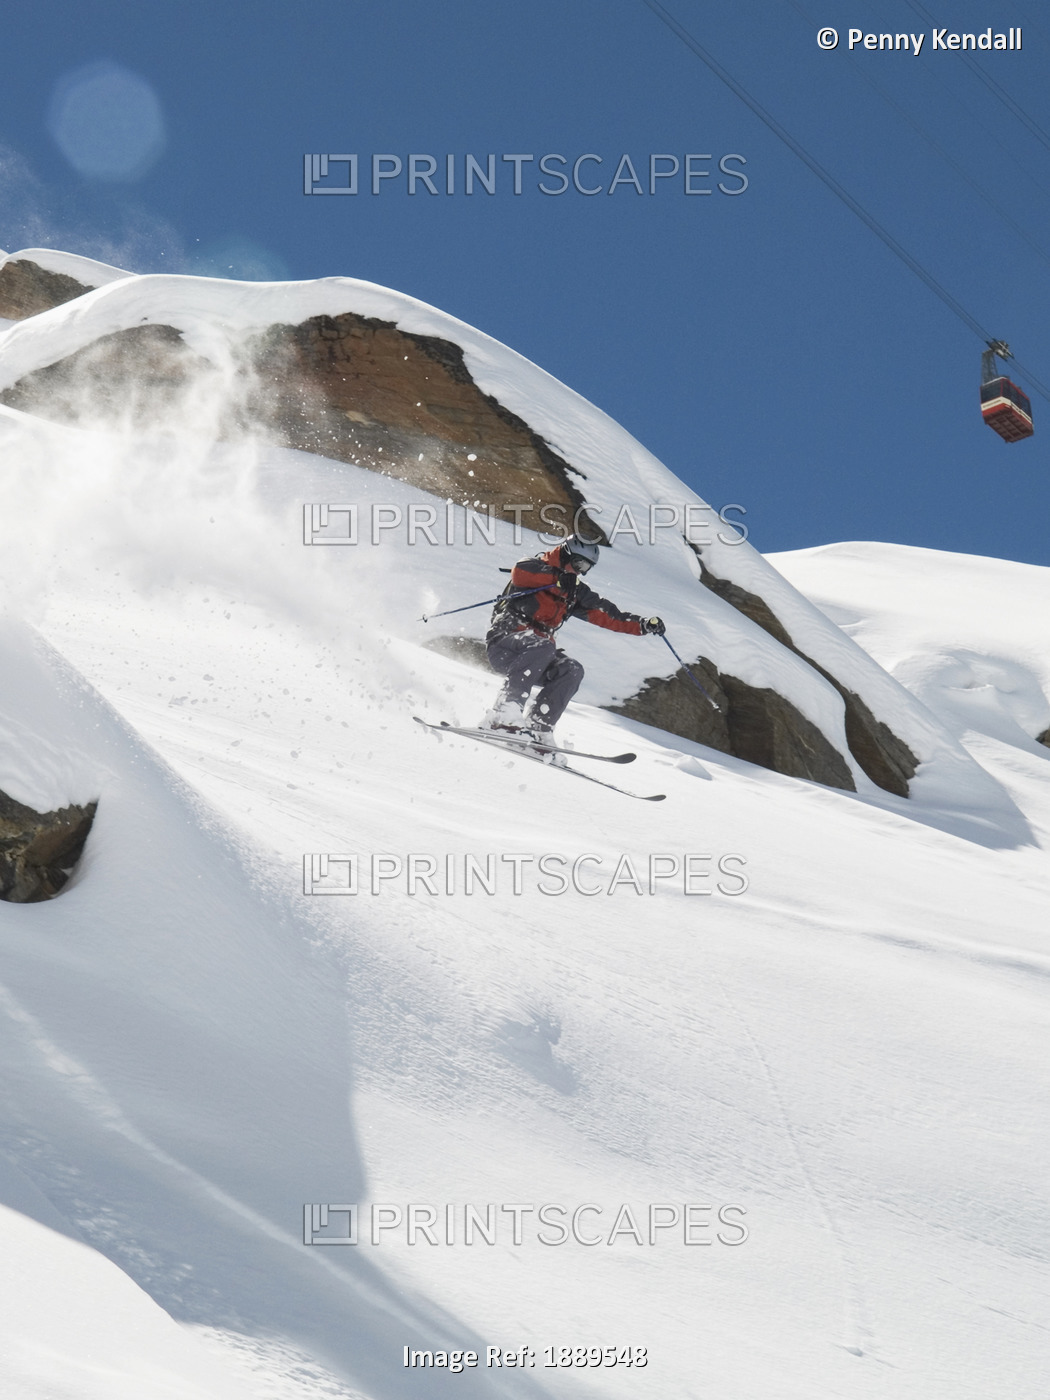 Helmeted Free-Rider Skis Off Piste And Makes A Big Jump Down Onto Fresh Powder